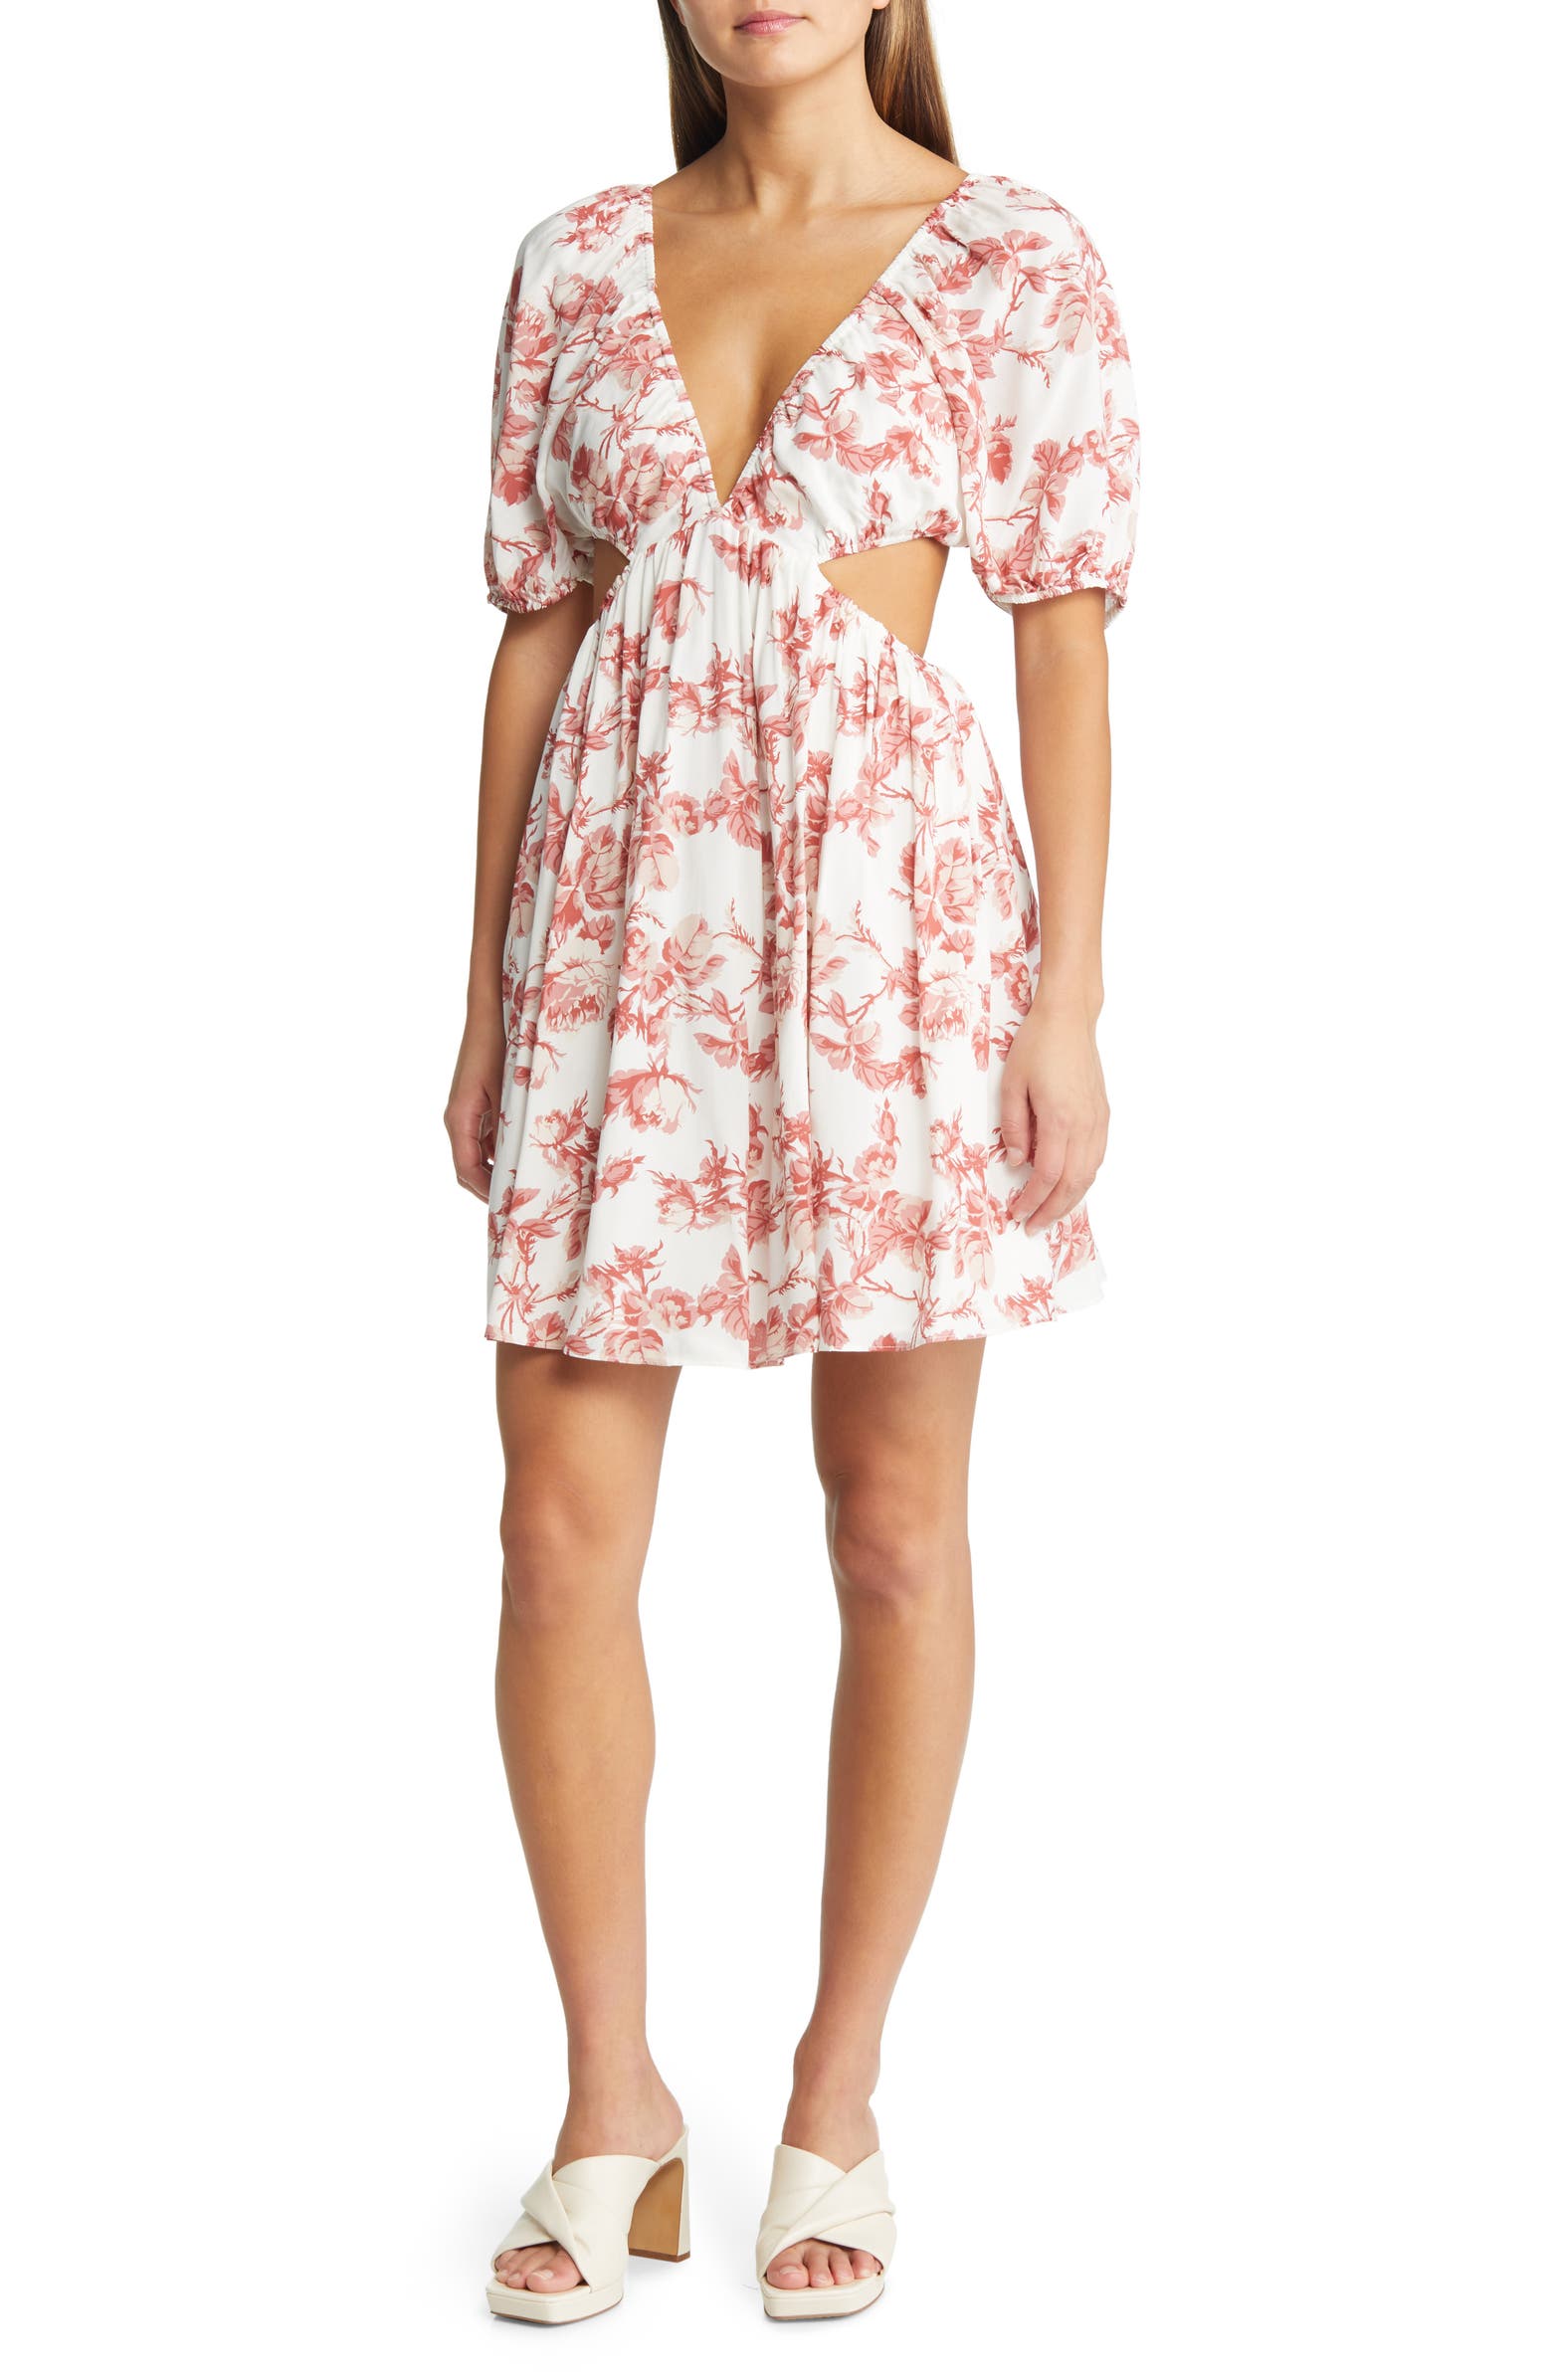 Short white and floral dress like Zimmermann from Bardot